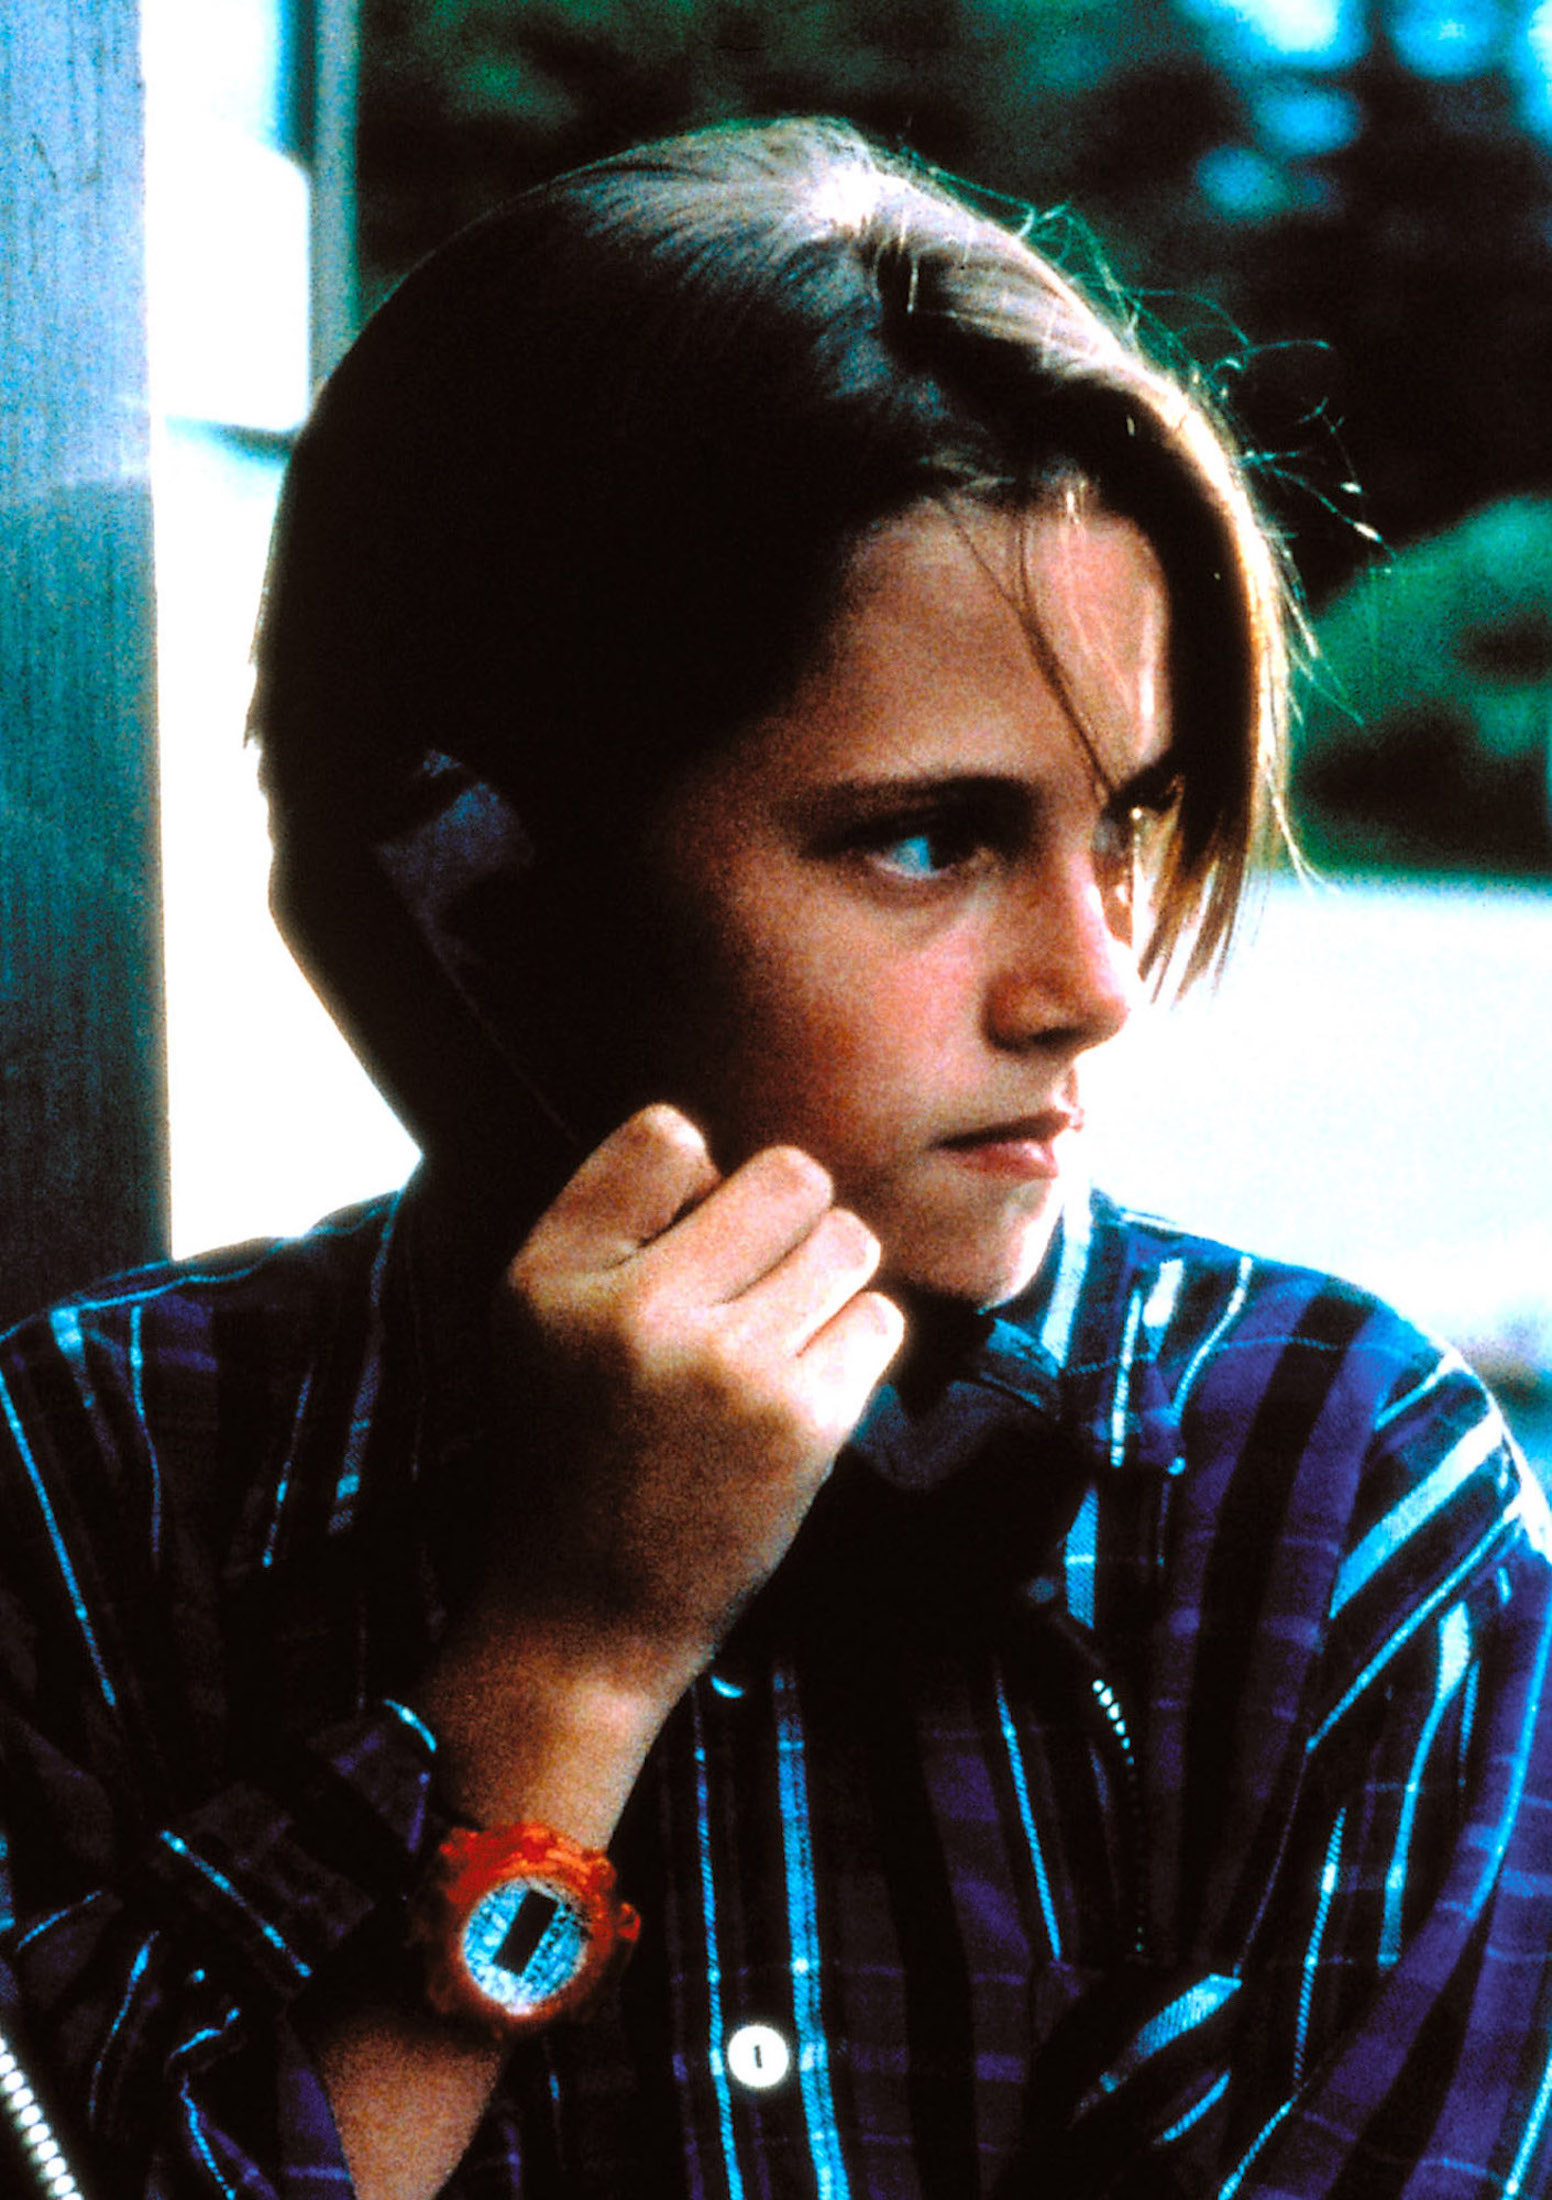 A young Kristen Stewart talking into a pay phone while wearing a